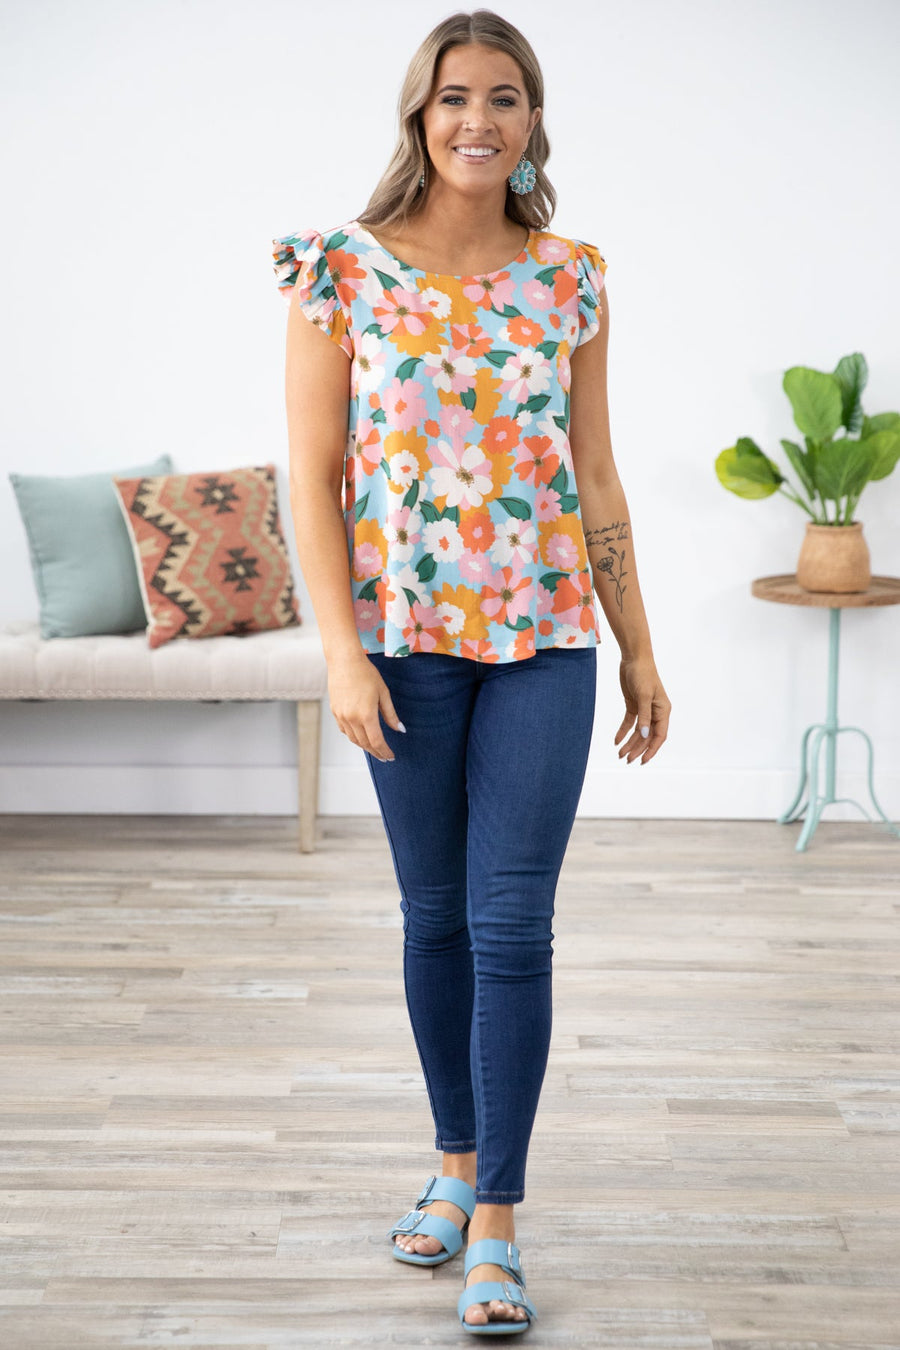 Aqua and Orange Floral Print Ruffle Sleeve Top - Filly Flair